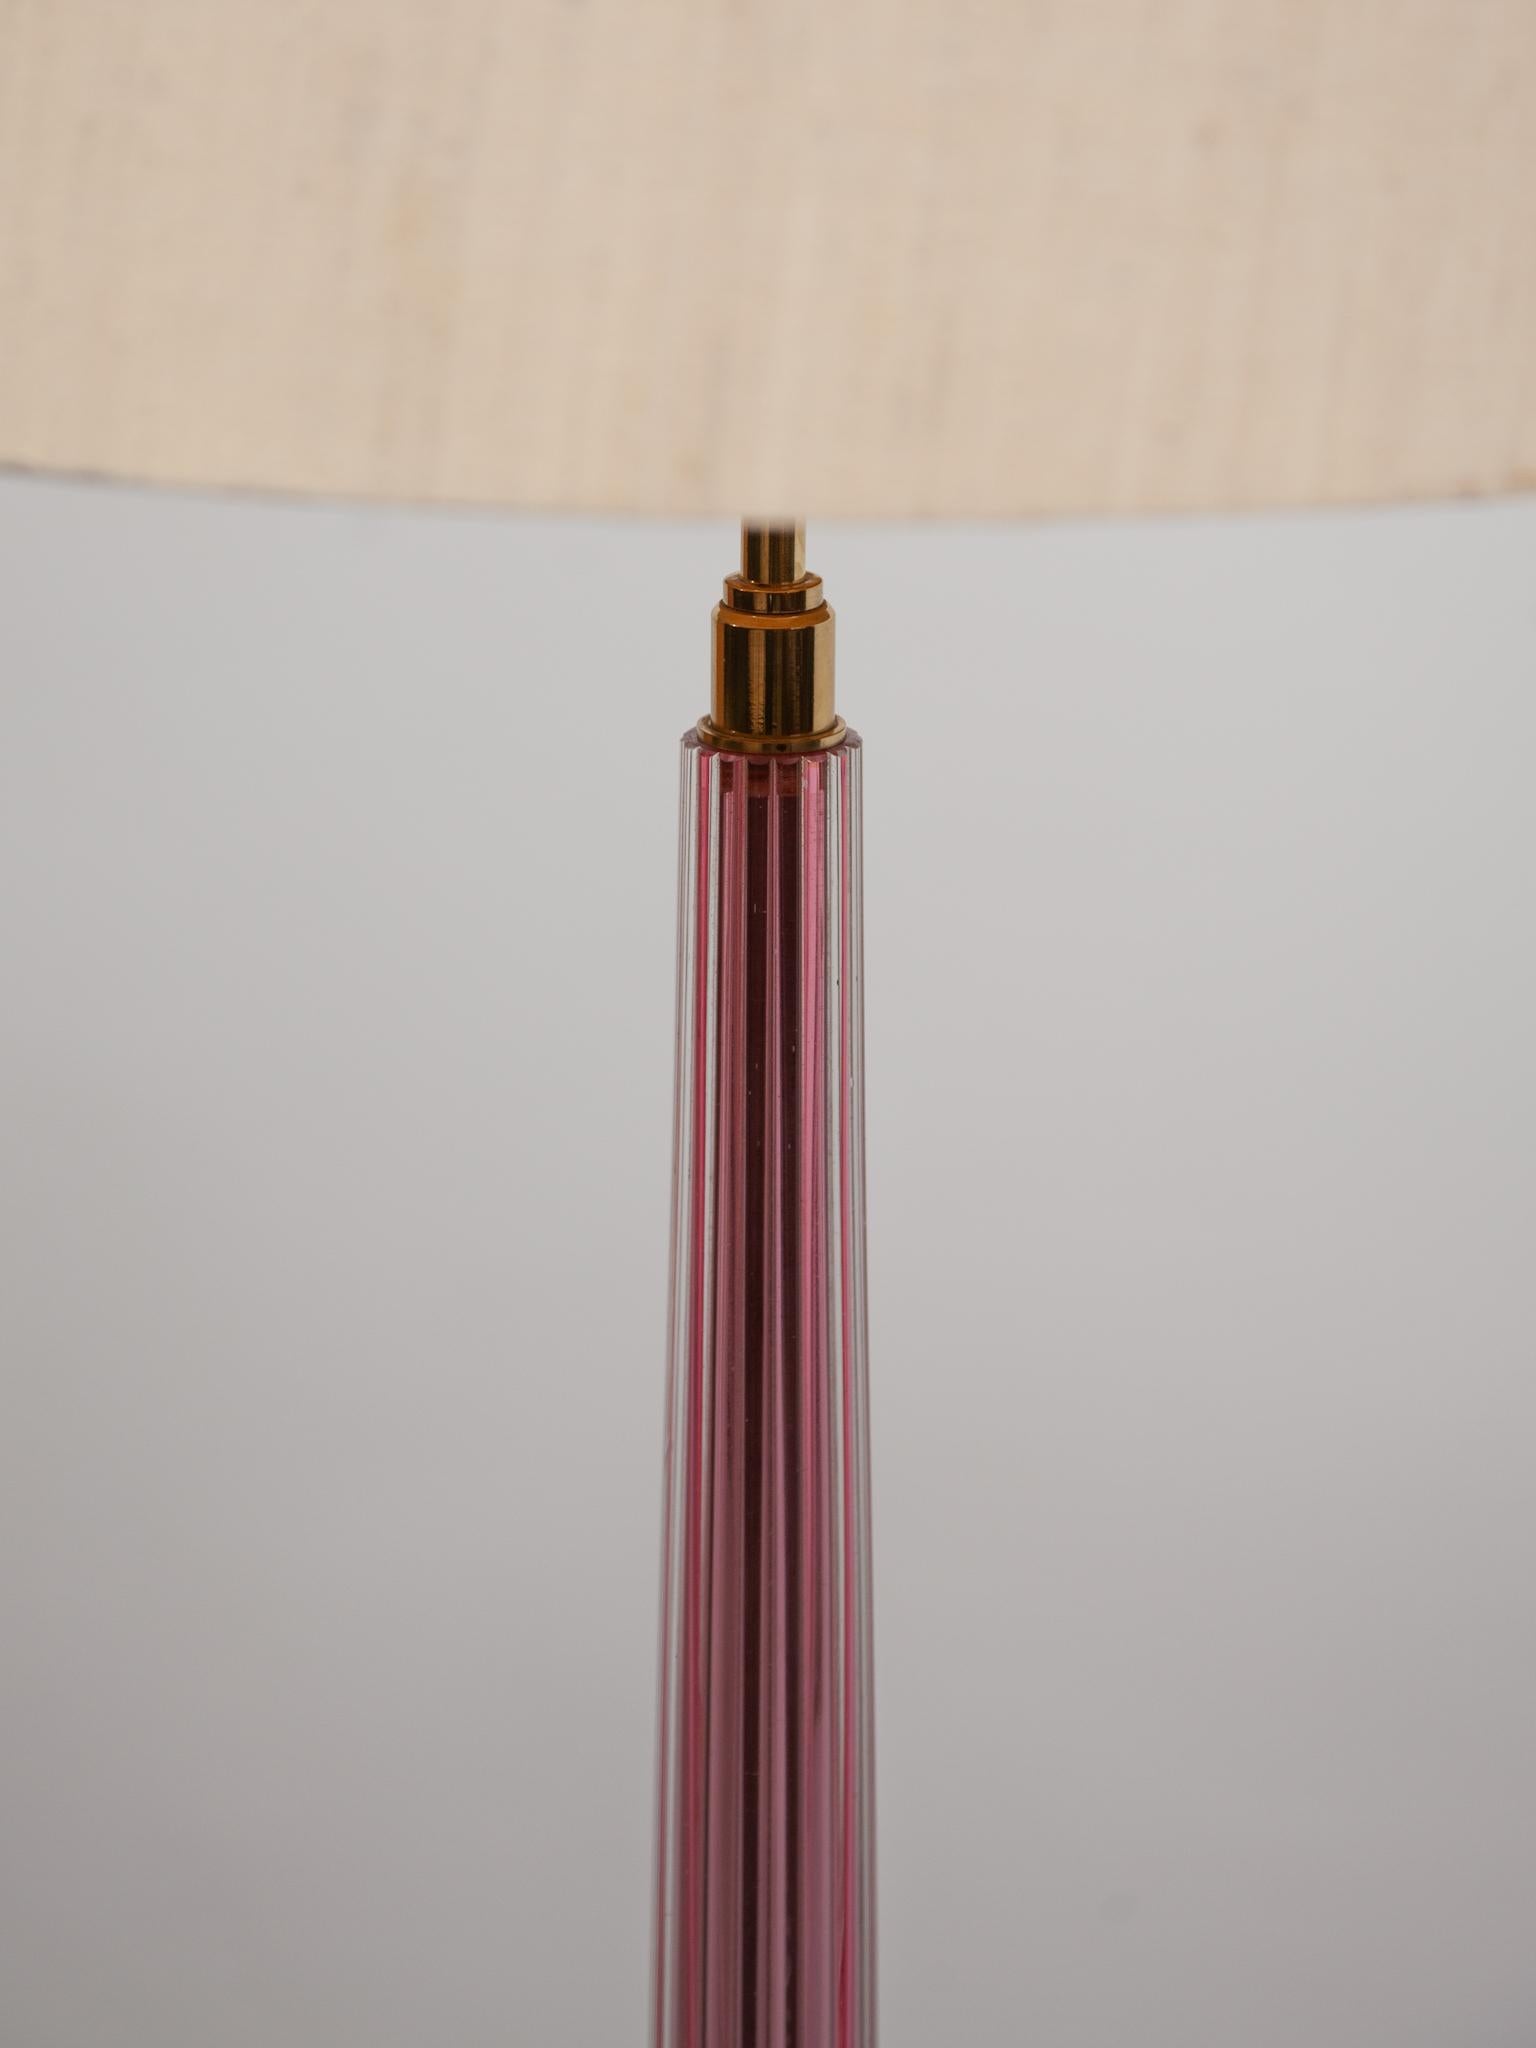 Barovier e Tosso Pink Art Glass Floor Lamp, Murano Blown Glass, 1950s, Italy For Sale 1